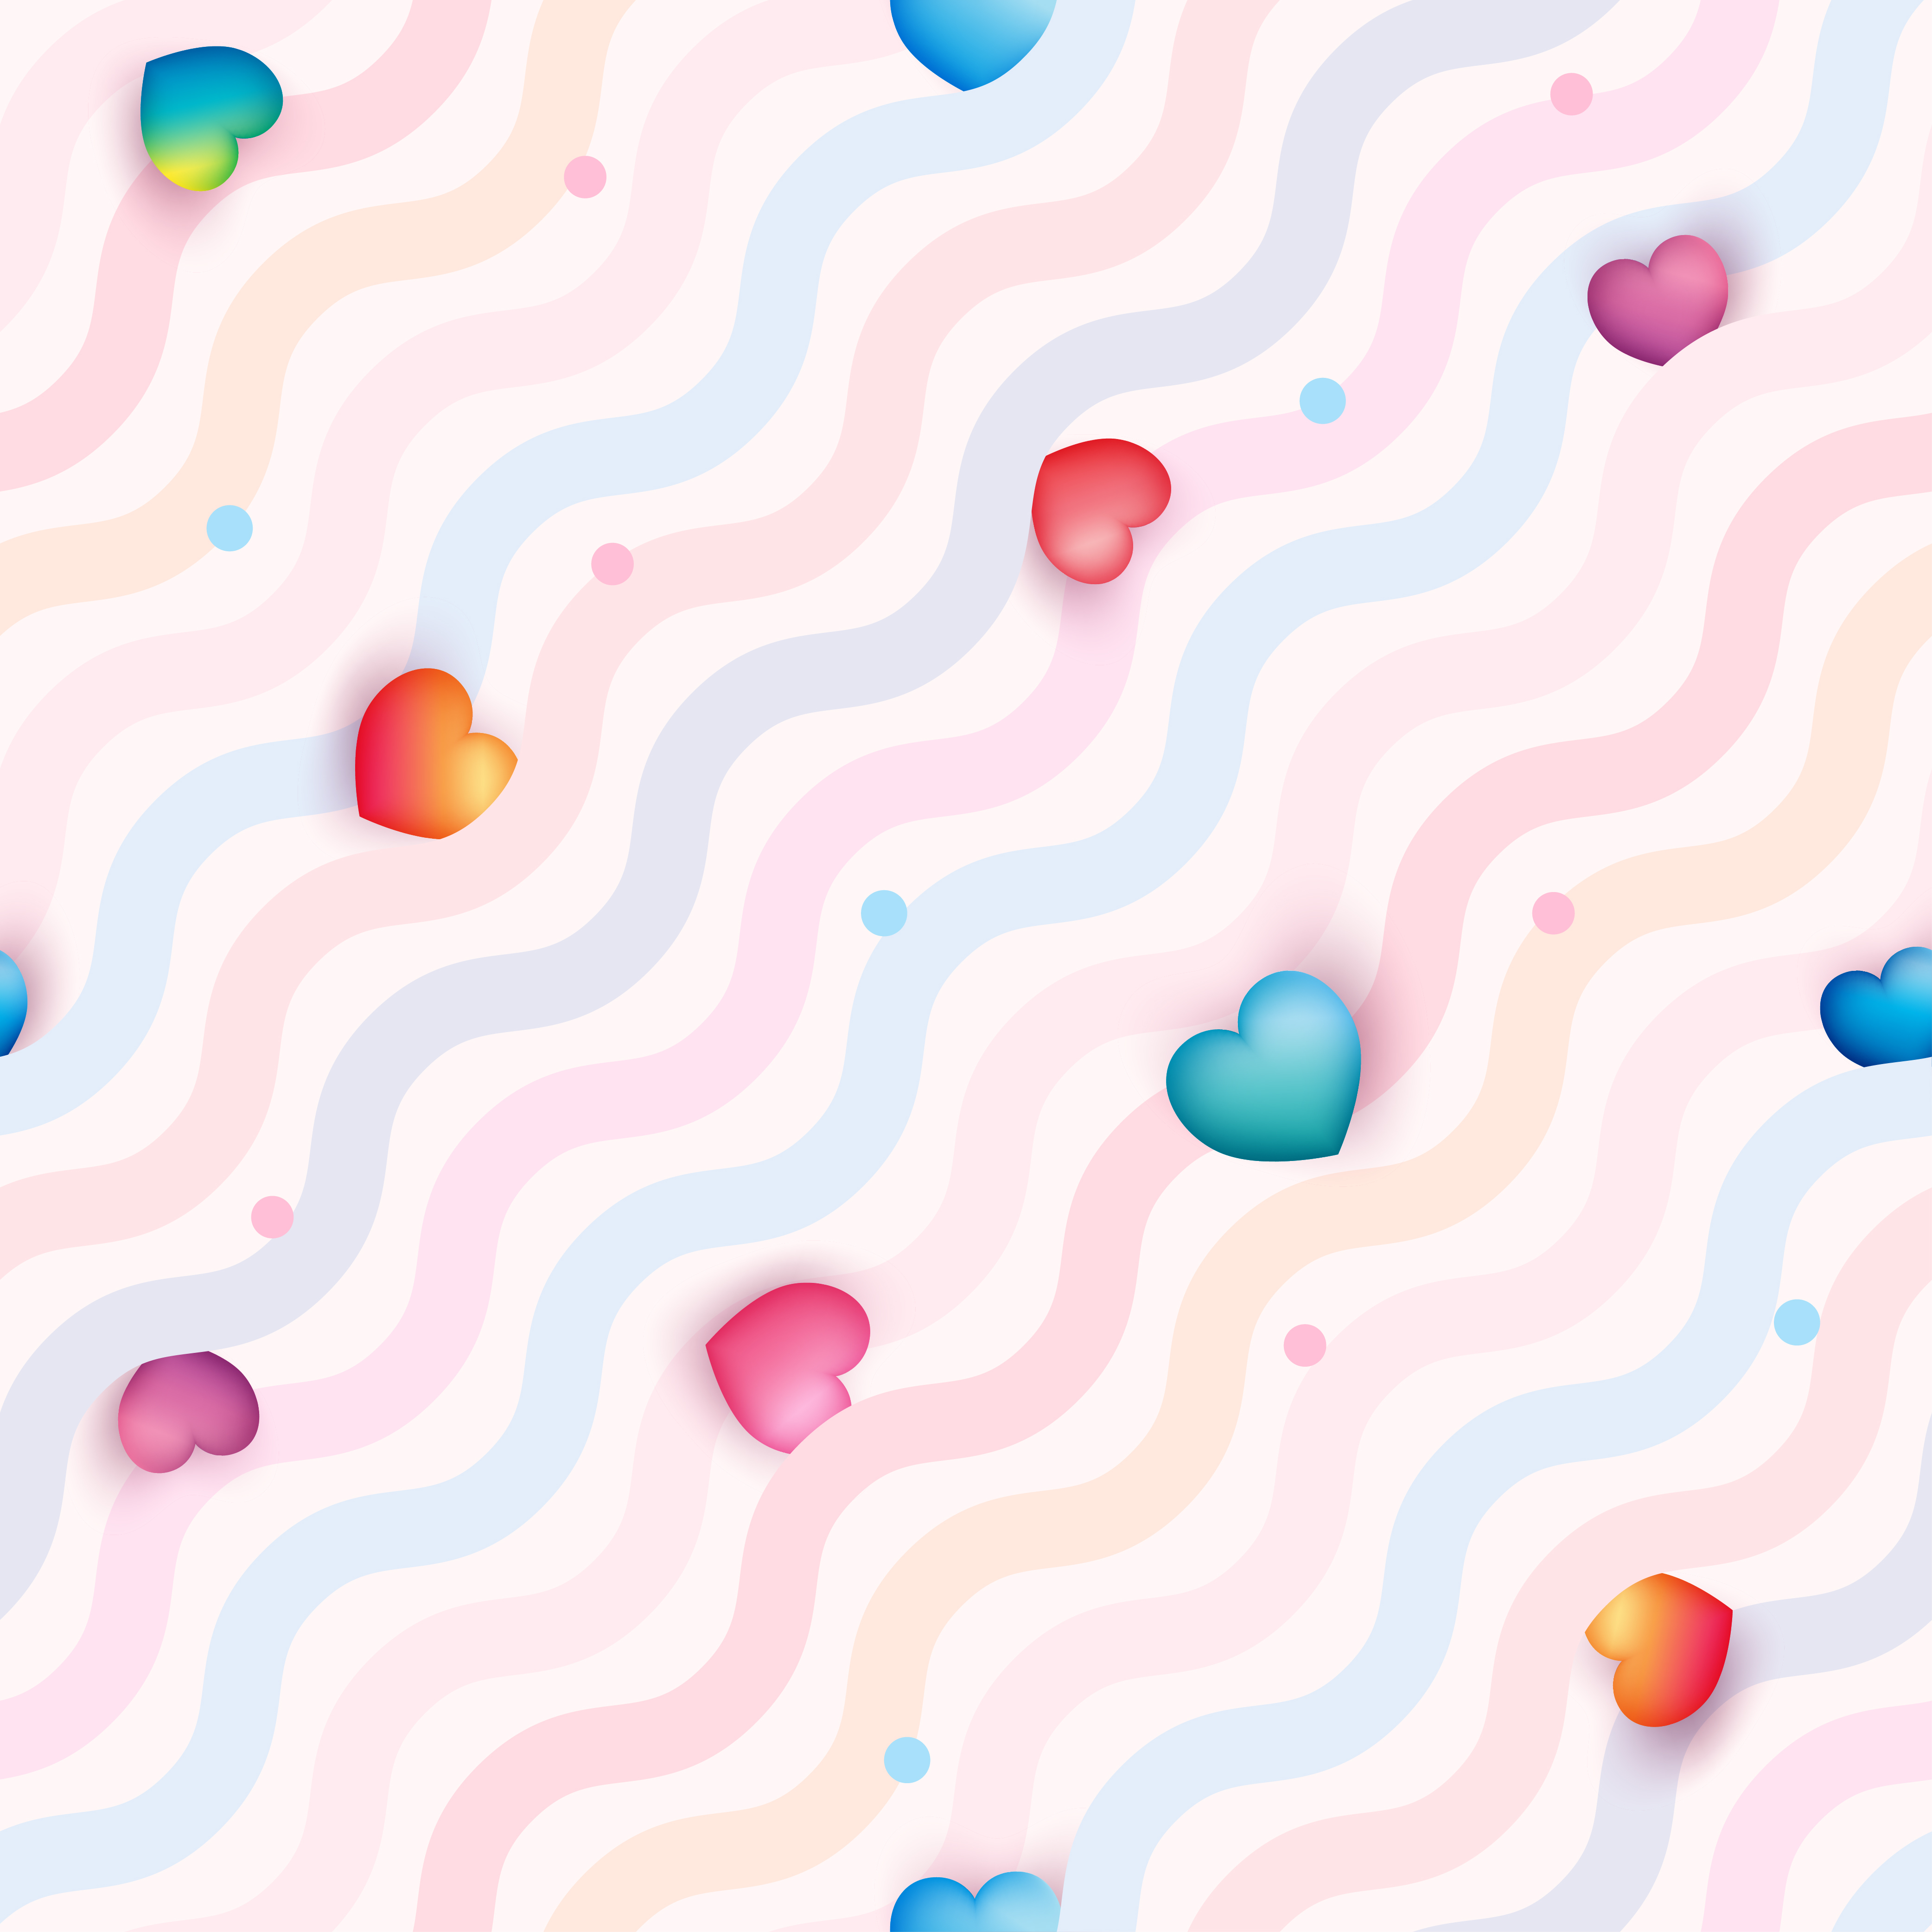 Heart seamless pattern with colorful pastel colors for Valentine